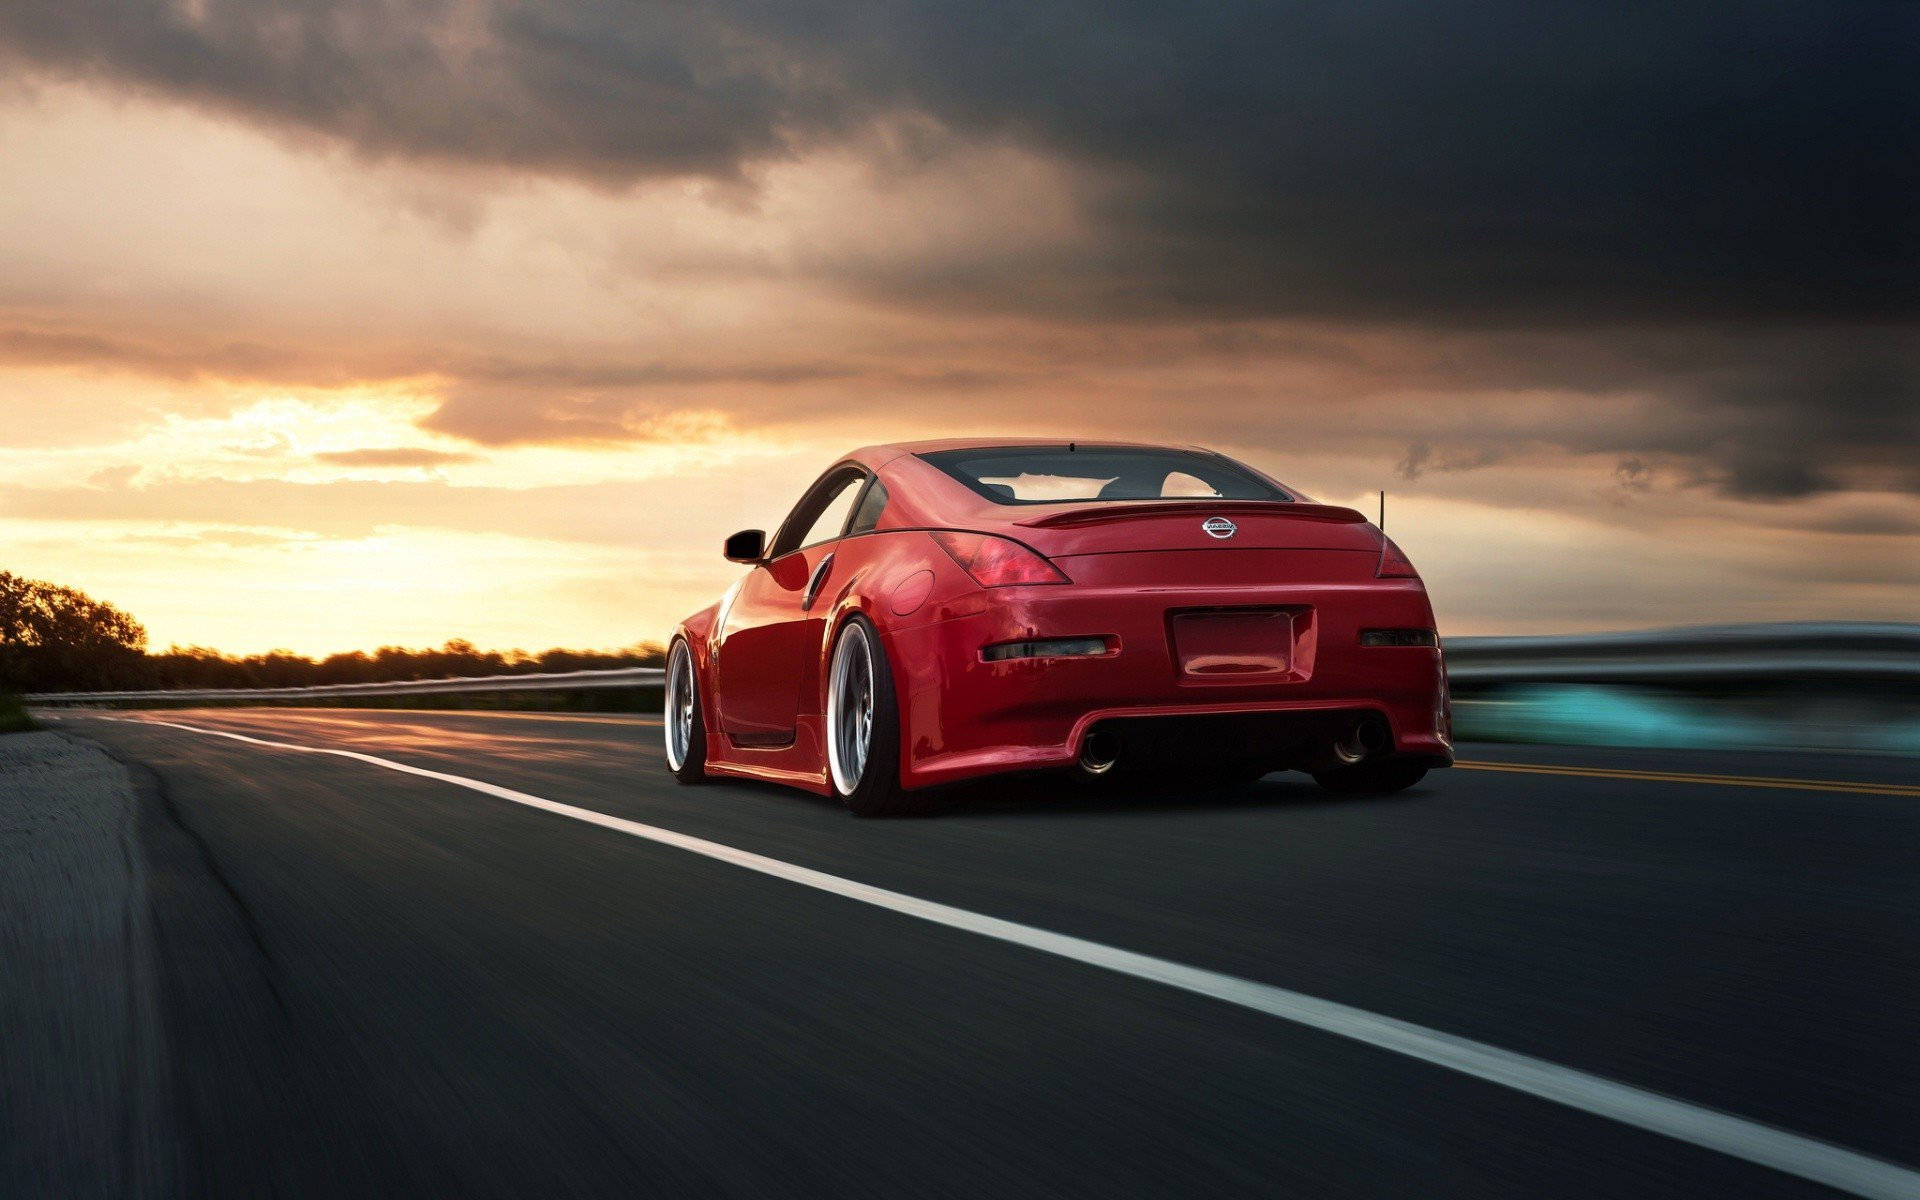 A Red Sports Car Driving Down A Road At Sunset Wallpaper